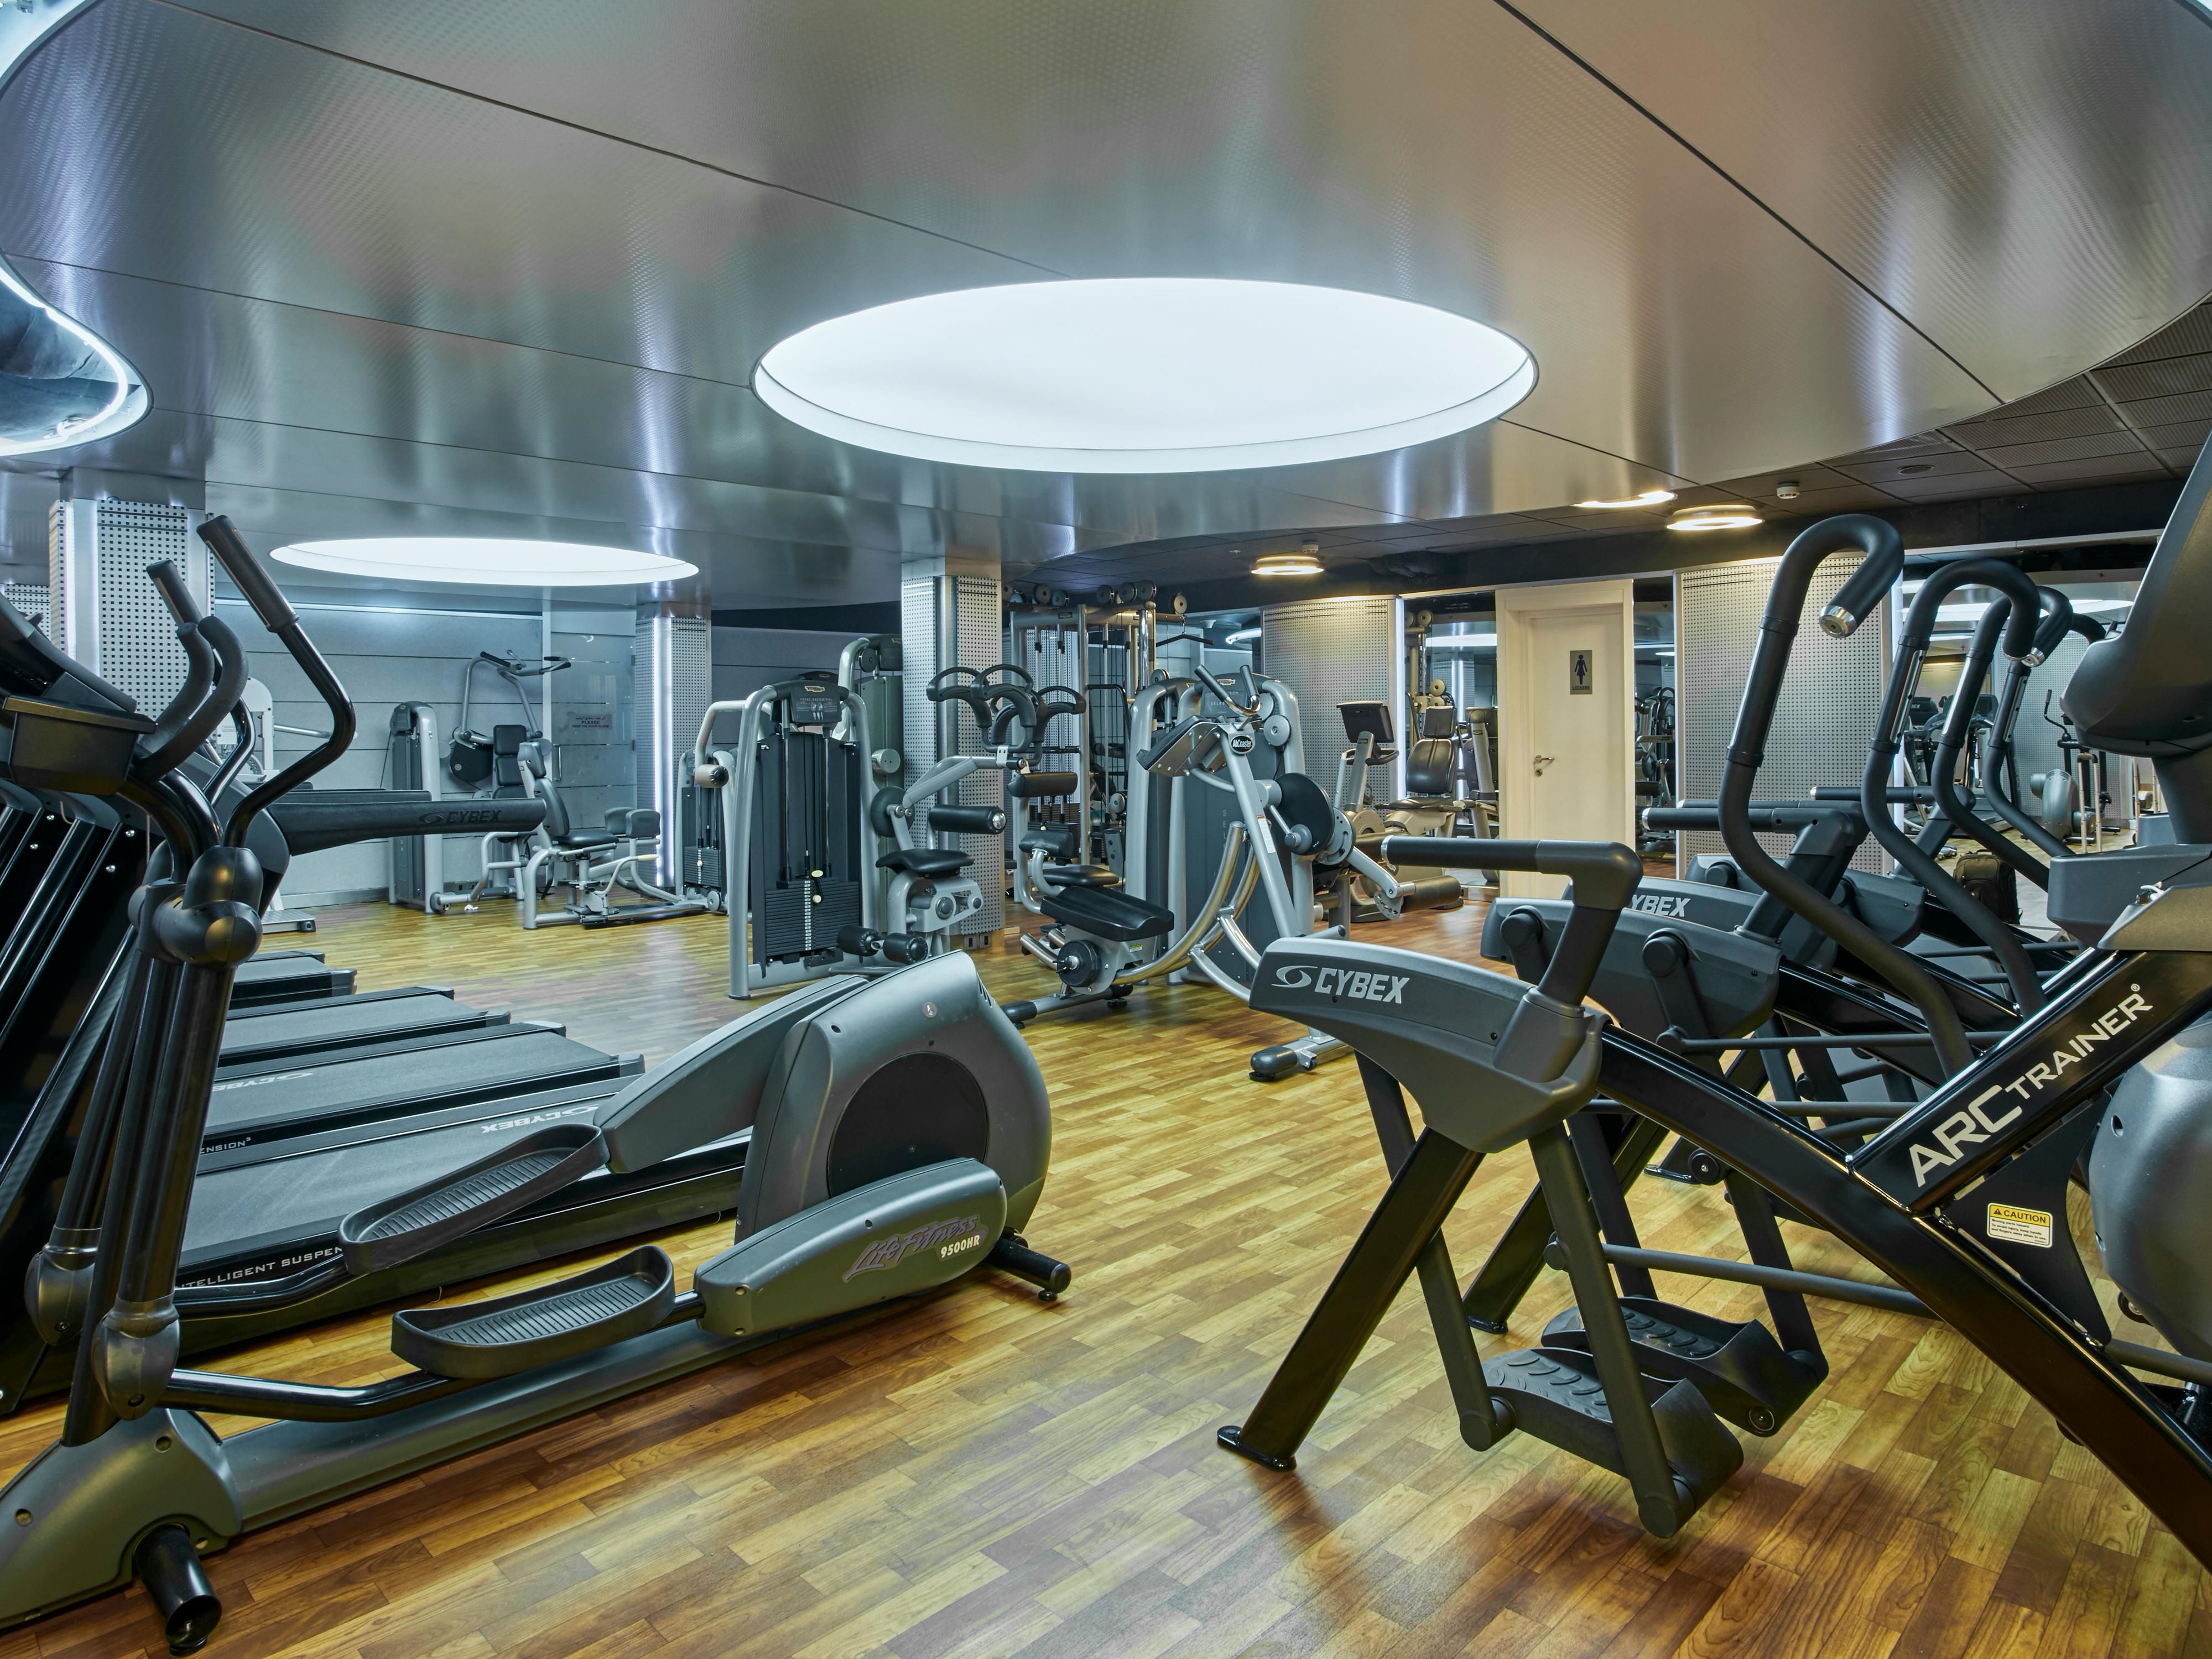 A modern fitness centre with over 10,000 square meters of workout and exercise facilities.